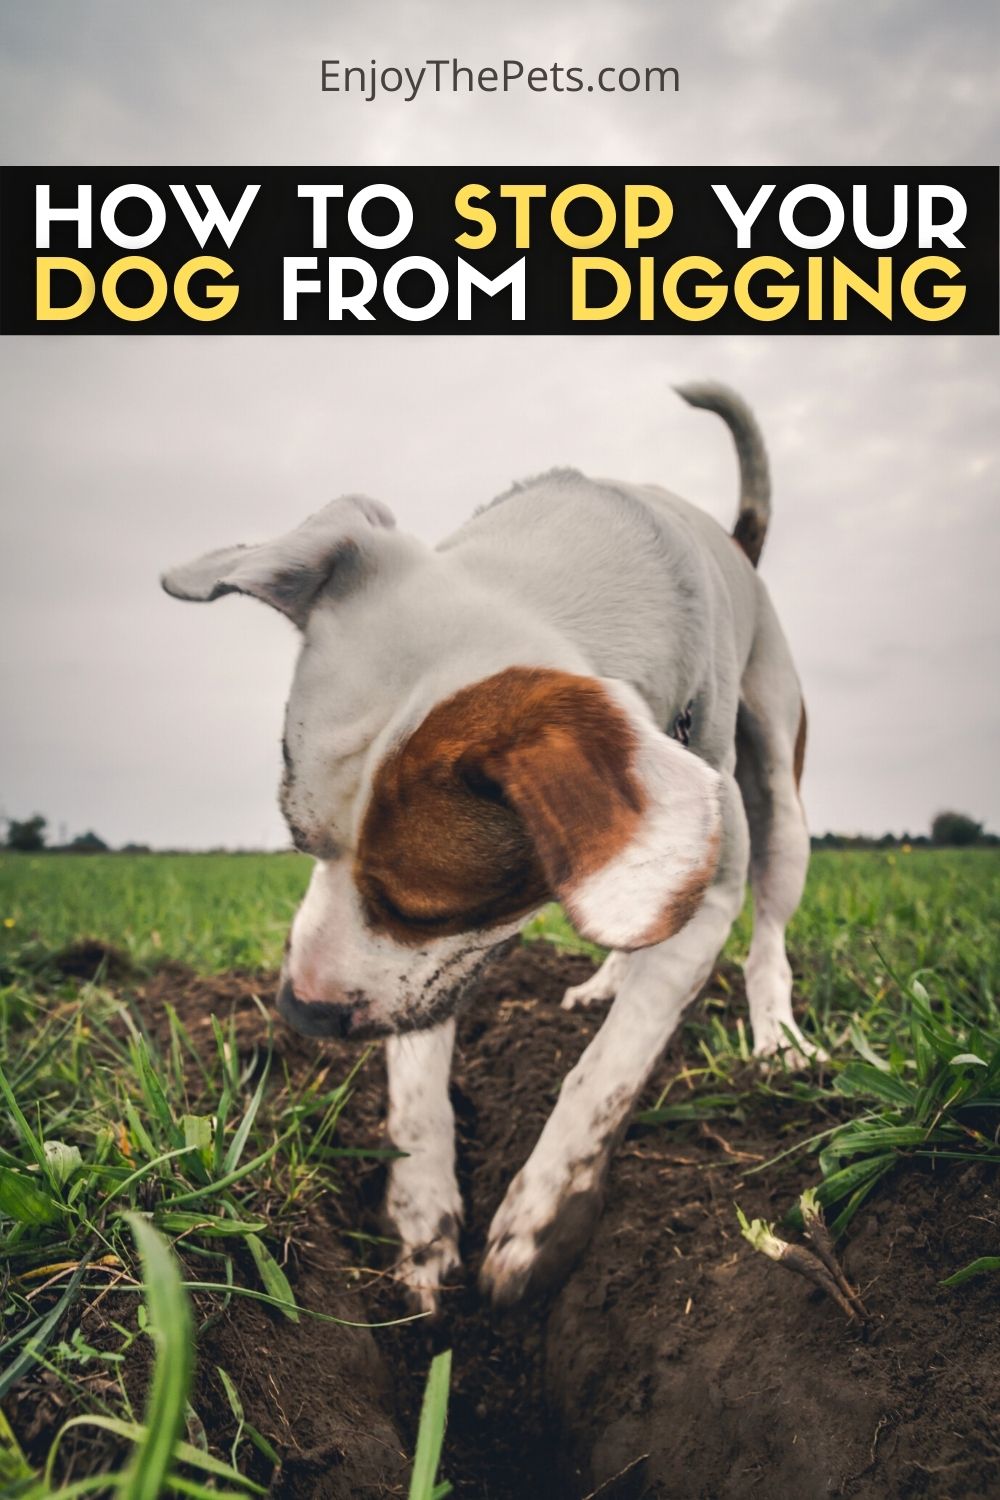 HOW TO STOP YOUR DOG FROM DIGGING